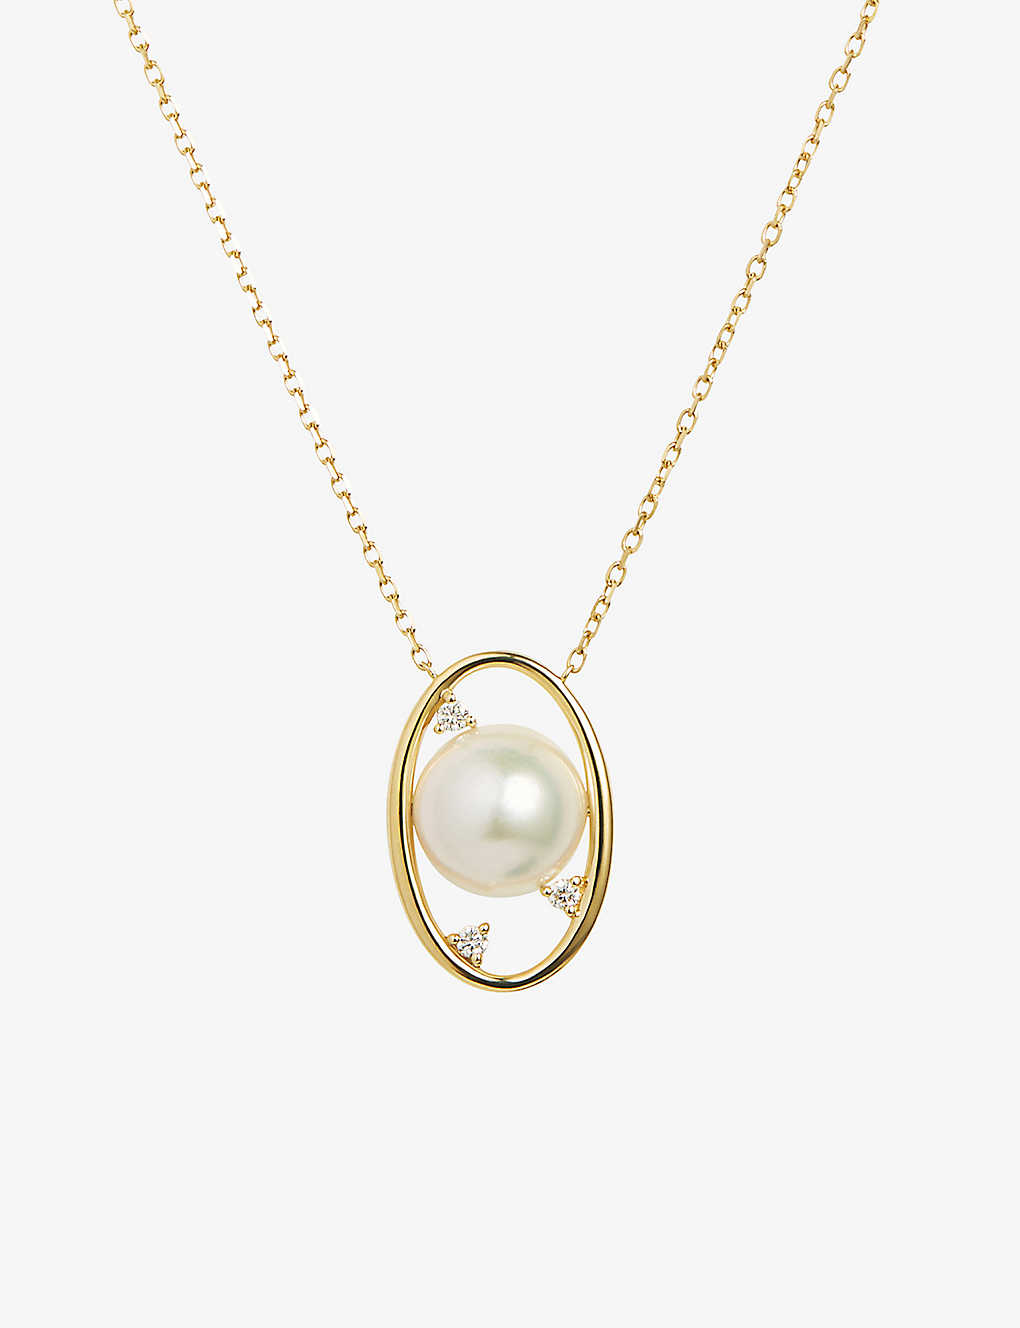 The Alkemistry Women's 18ct Yellow Gold Ruifier Morning Dew 18ct Yellow-gold, Akoya Pearl And 0.041c